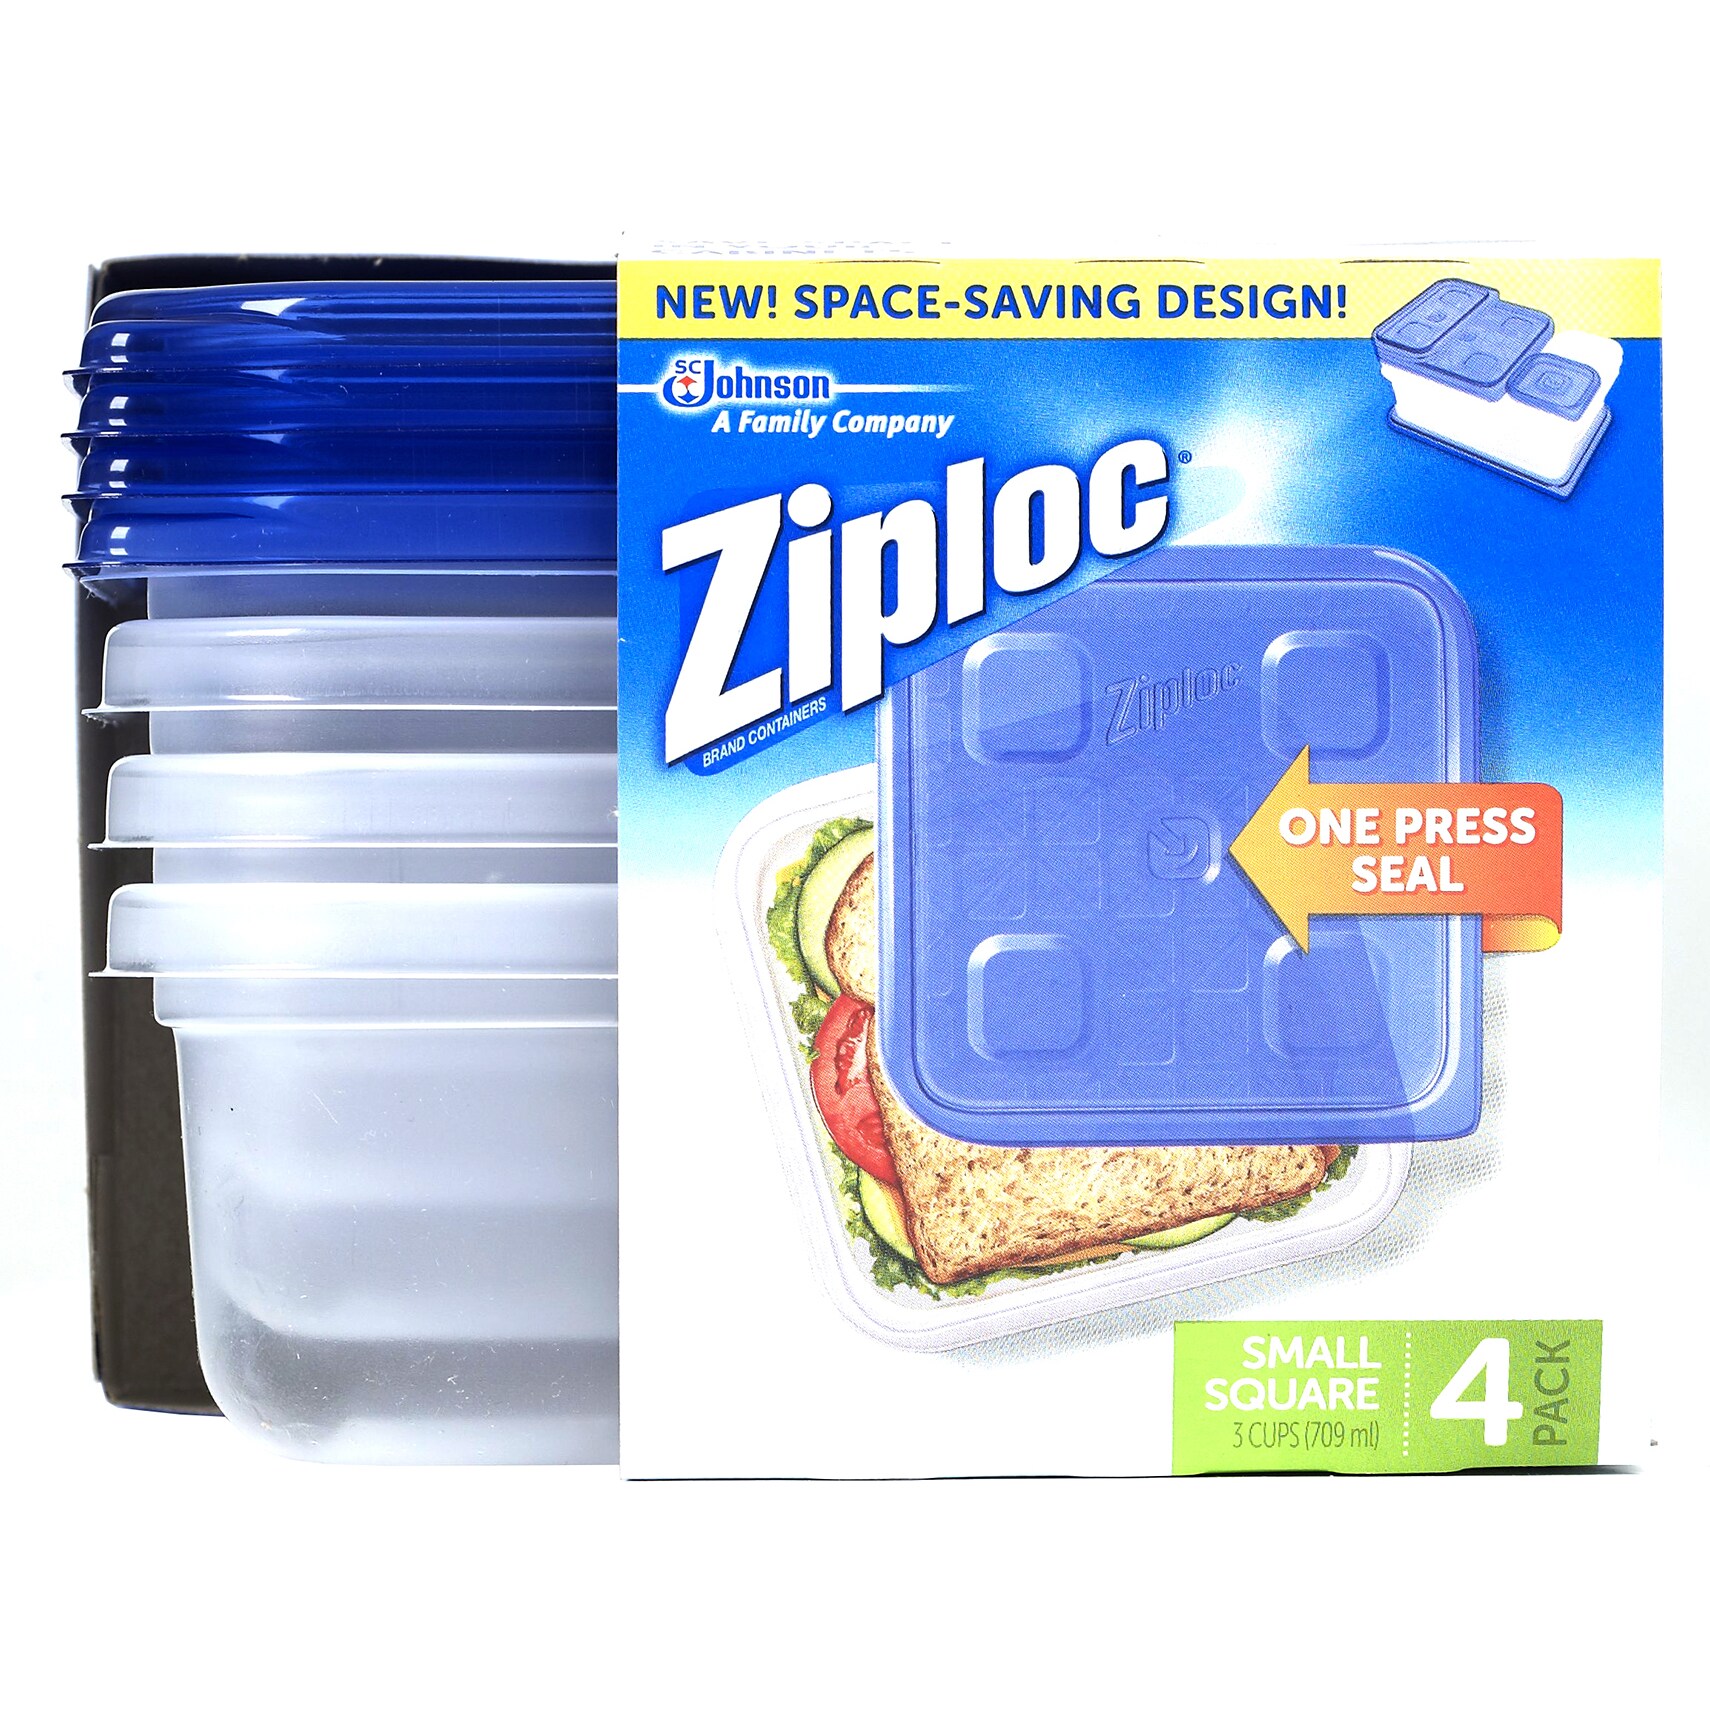 https://ak1.ostkcdn.com/images/products/12557120/Ziploc-70935-Small-Square-Container-4-count-a5a151d4-7a51-45a7-ab0a-cf7e097fbac8.jpg